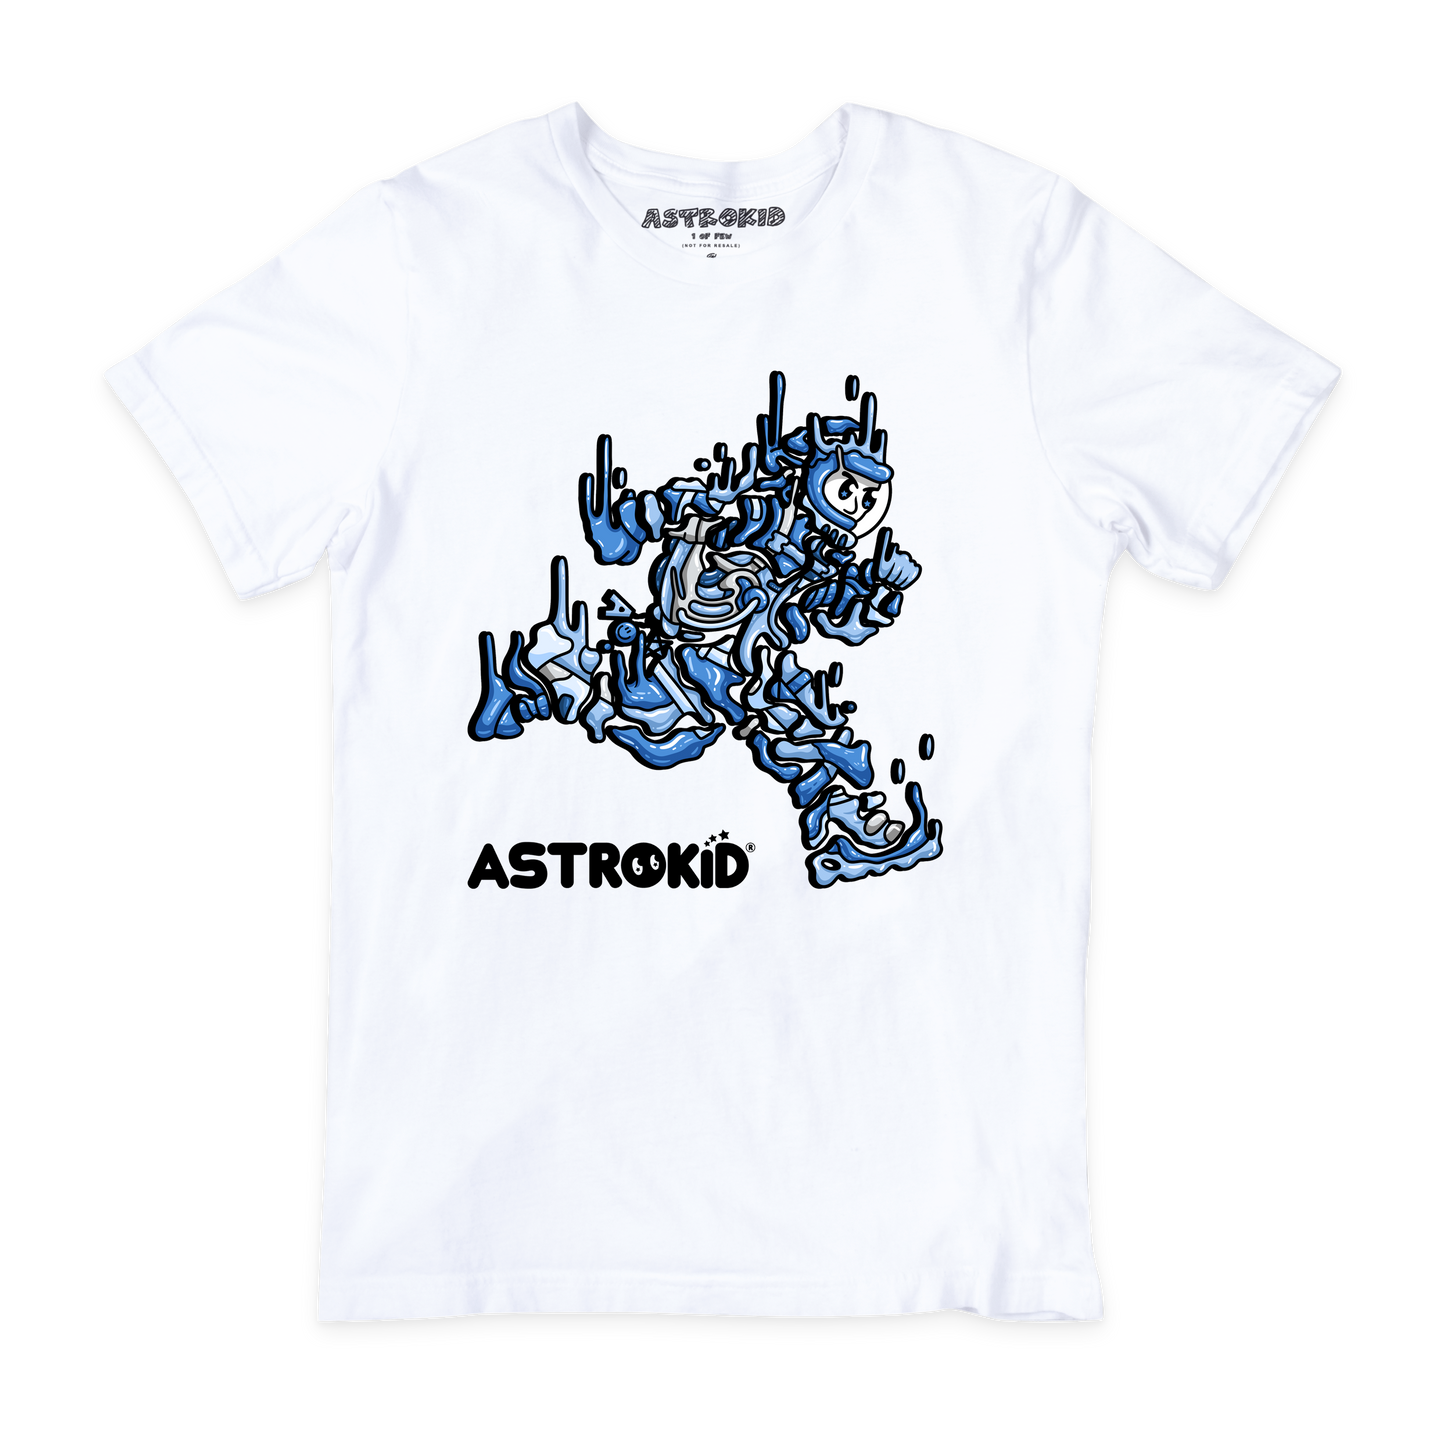 Astrokid's Alchemist Tee, a high-quality streetwear tee featuring intricate alchemy-inspired graphics and innovative 4D technology.